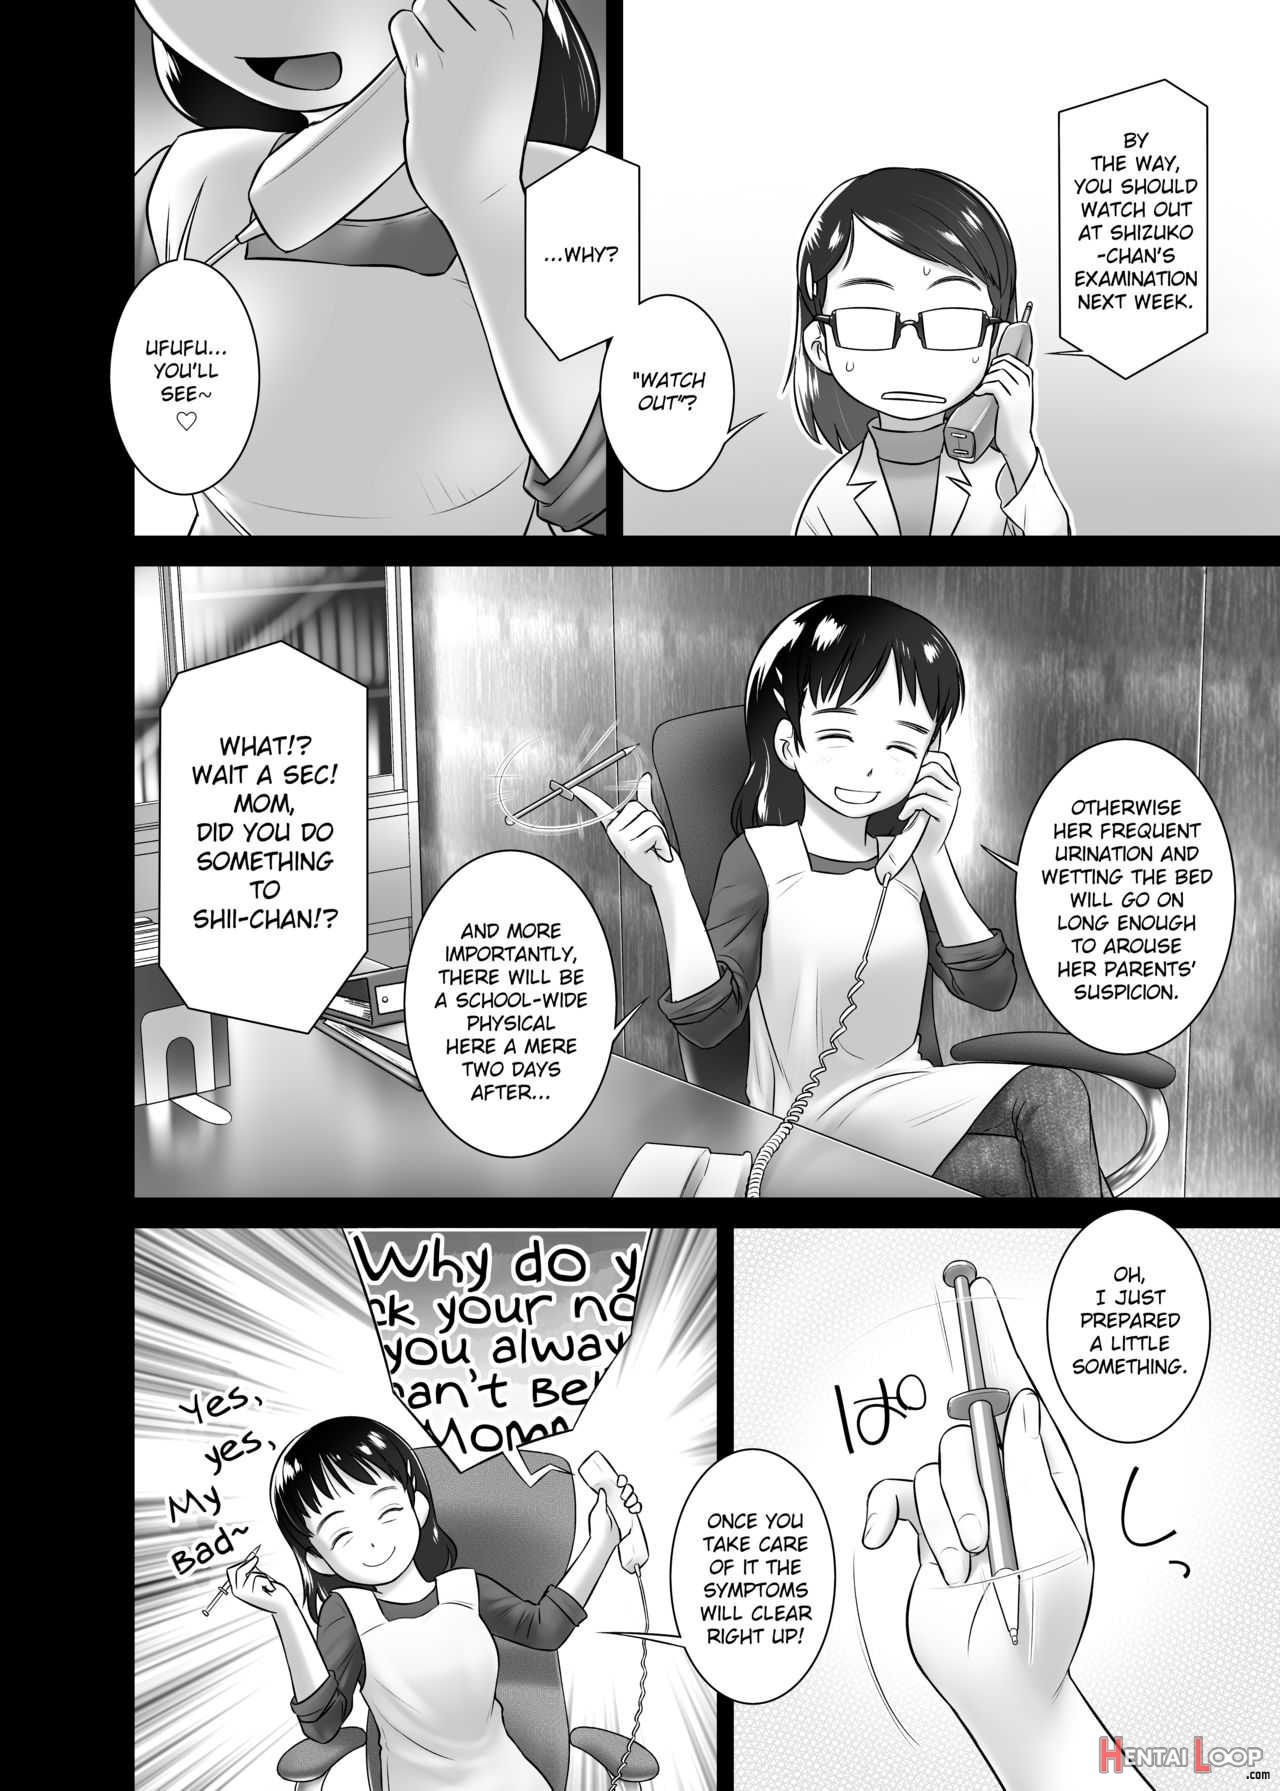 Oshikko Sensei From 3 Years Old - V page 3